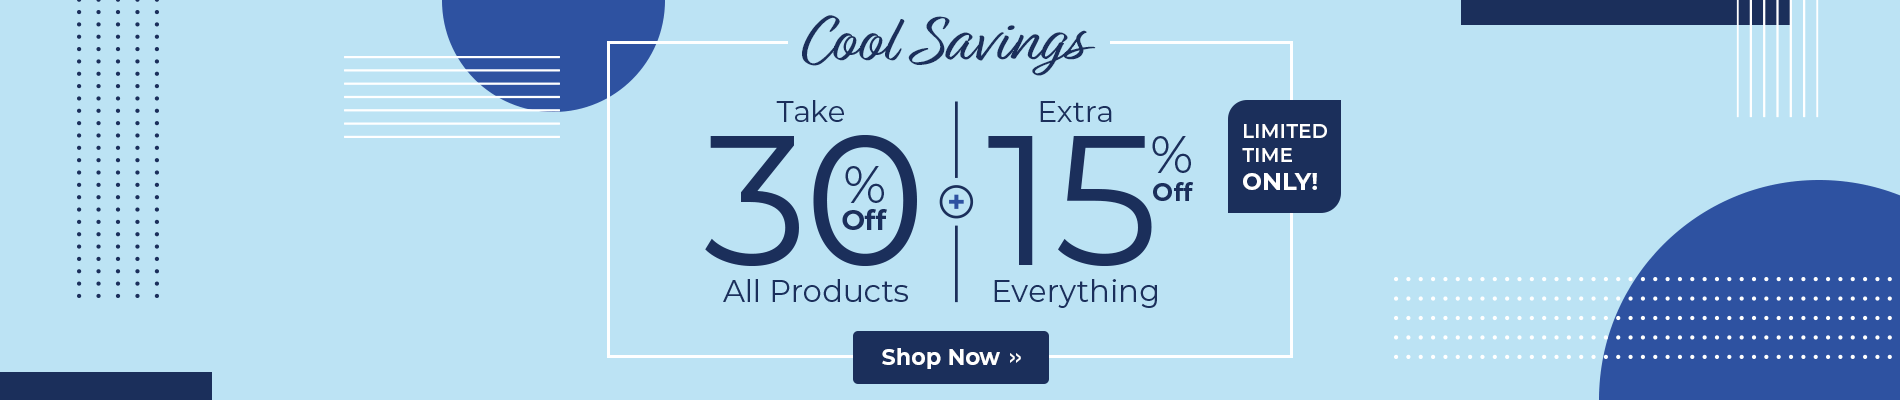 Take 30% Off + Extra 15% Off Everything!